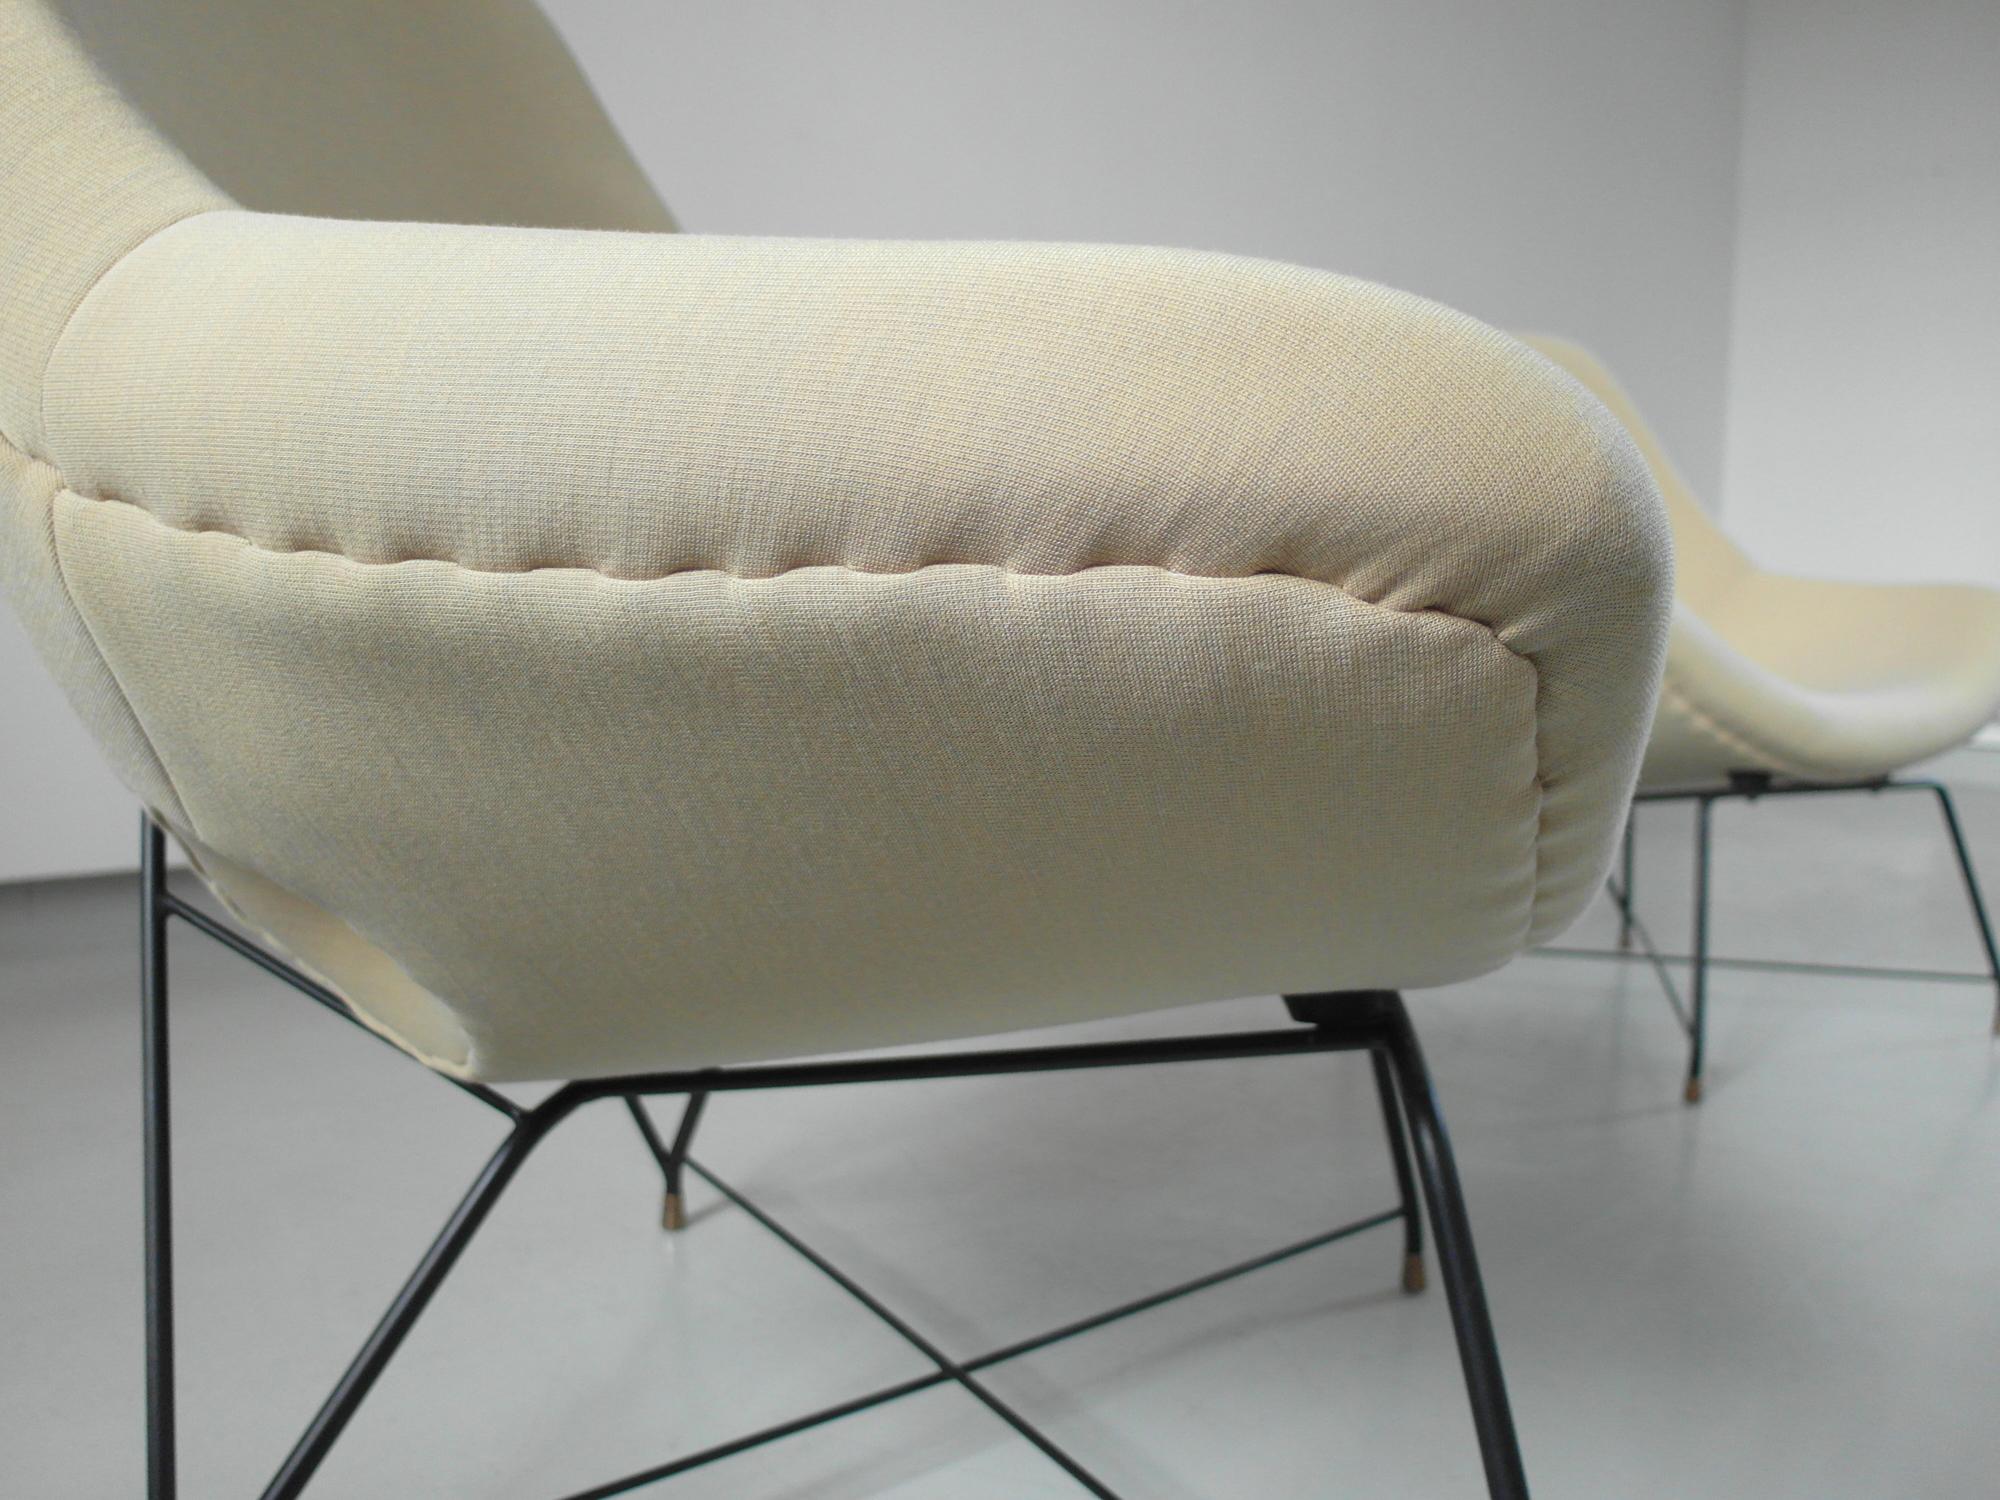 Sculptural Pair of Lounge Chairs by Augusto Bozzi for Saporiti, Italy, 1954 For Sale 8